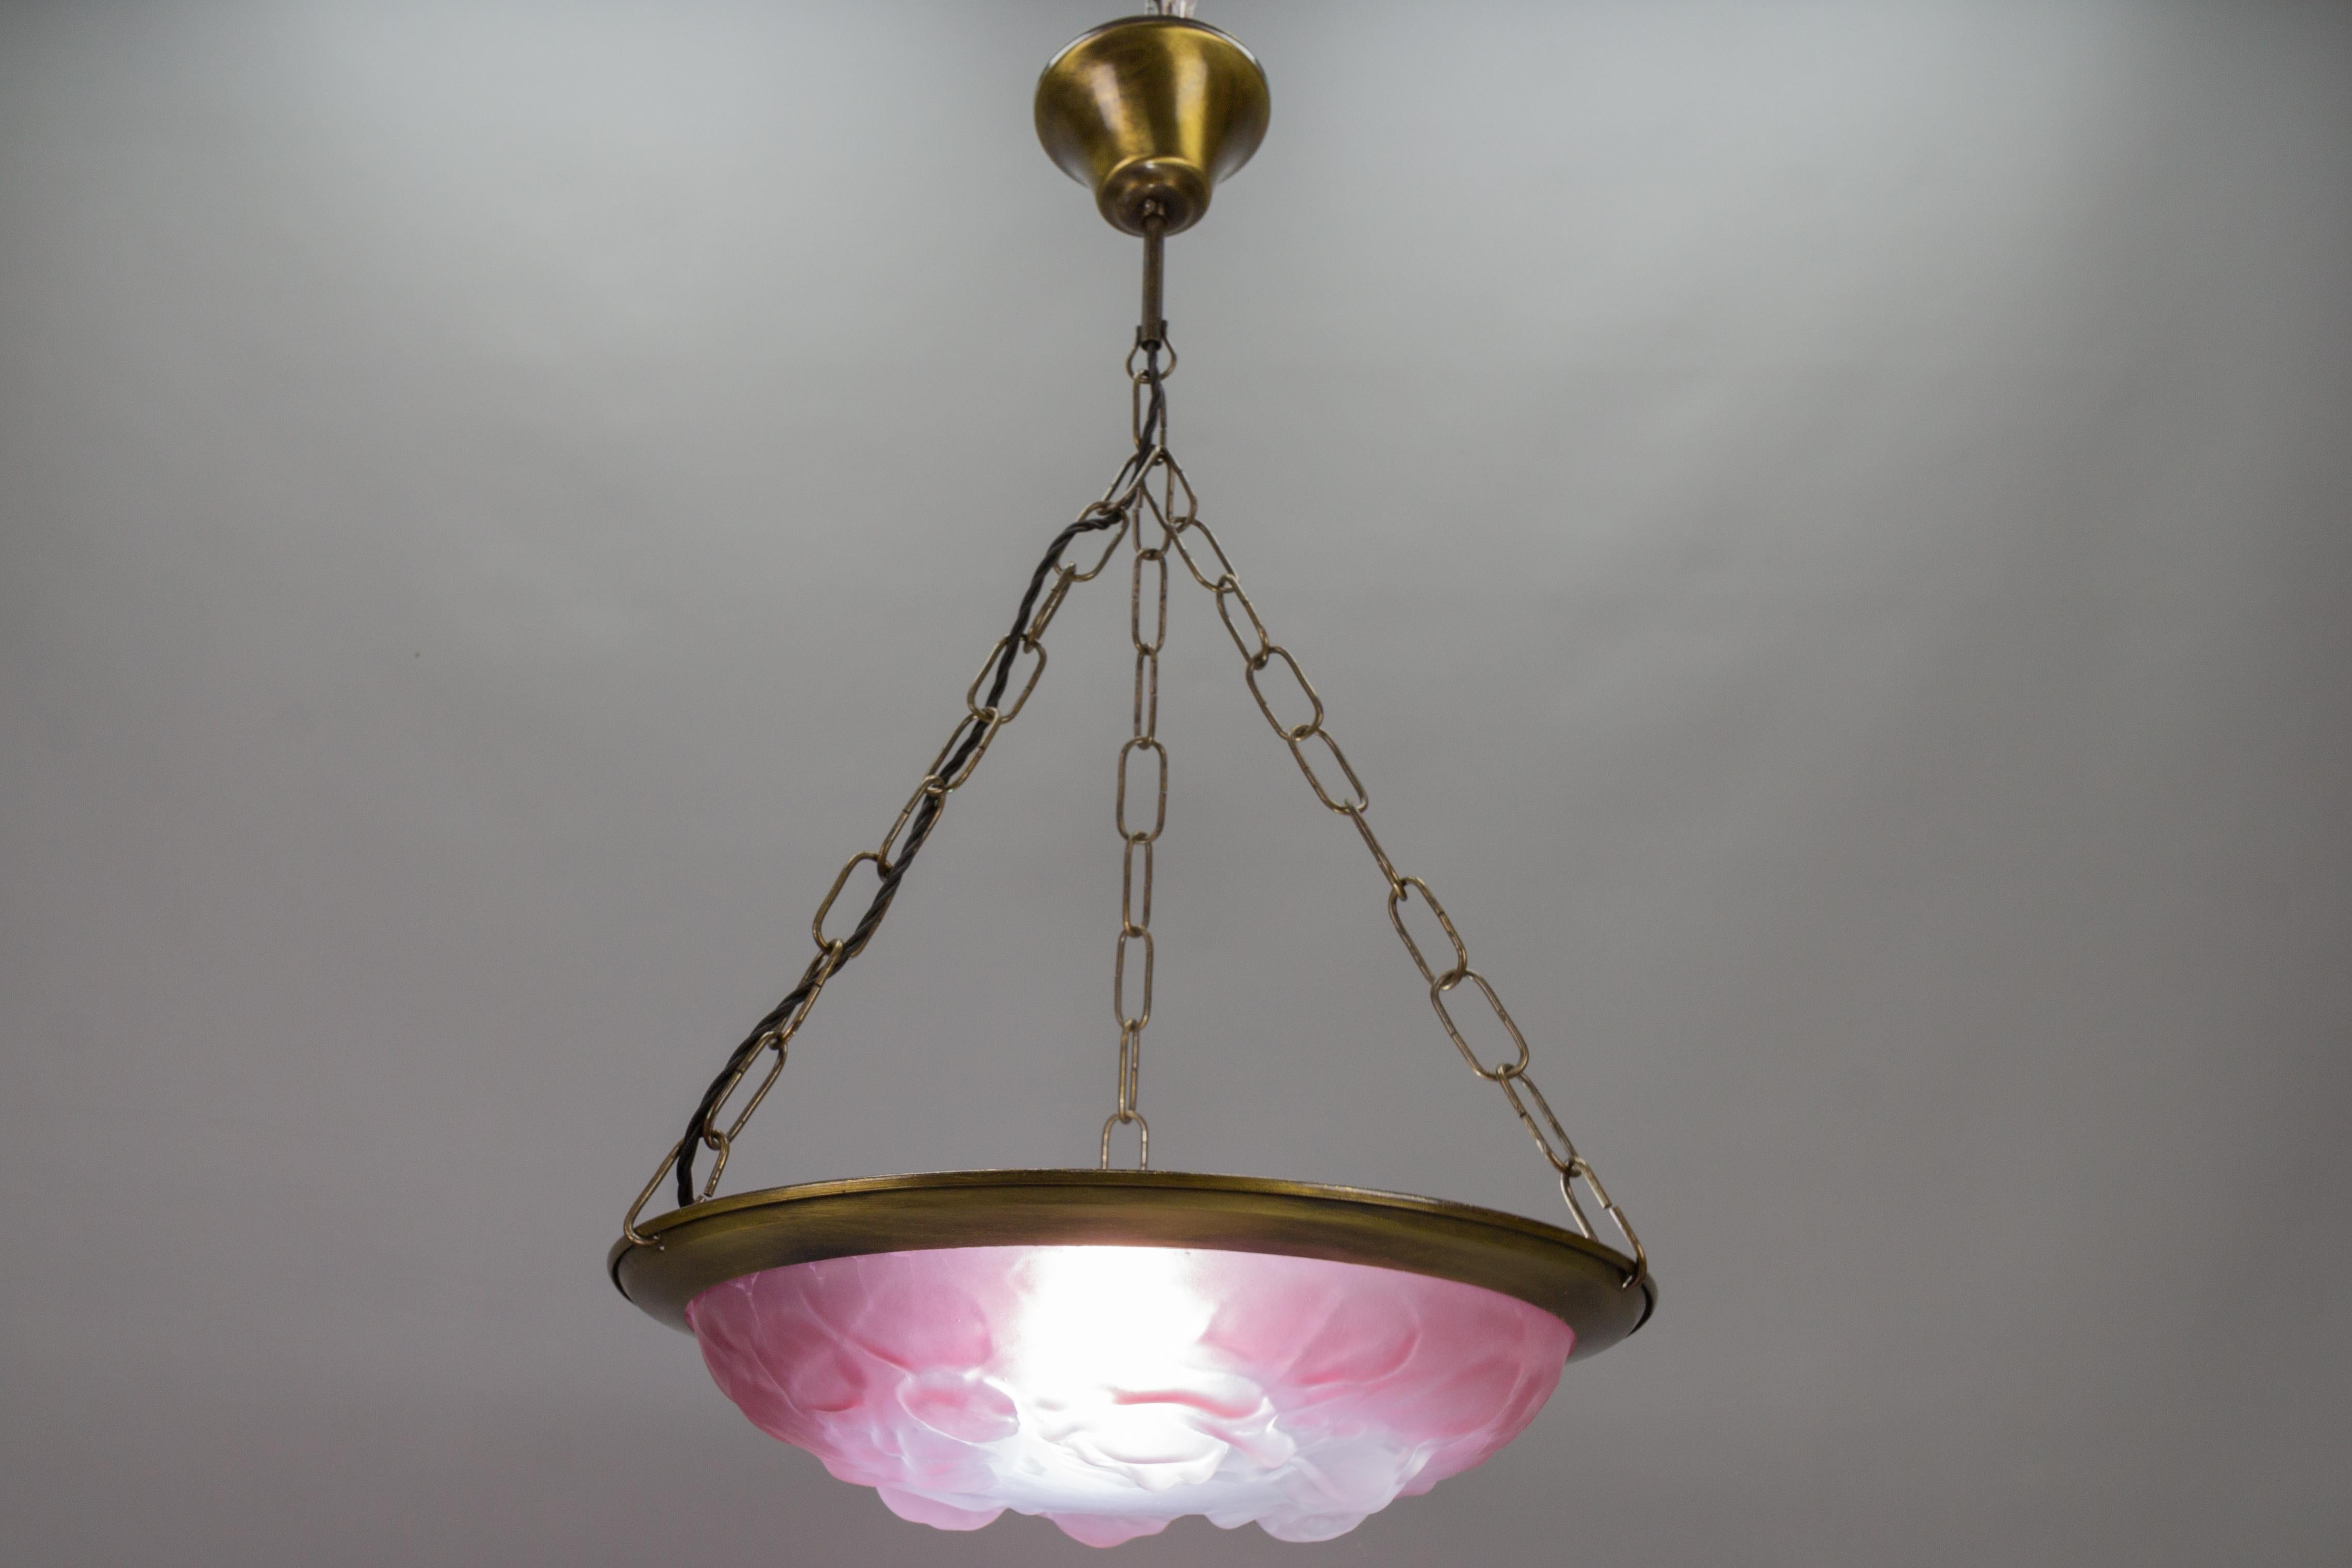 French Vintage Art Deco Style Pink and White Glass Pendant Light with Roses 1